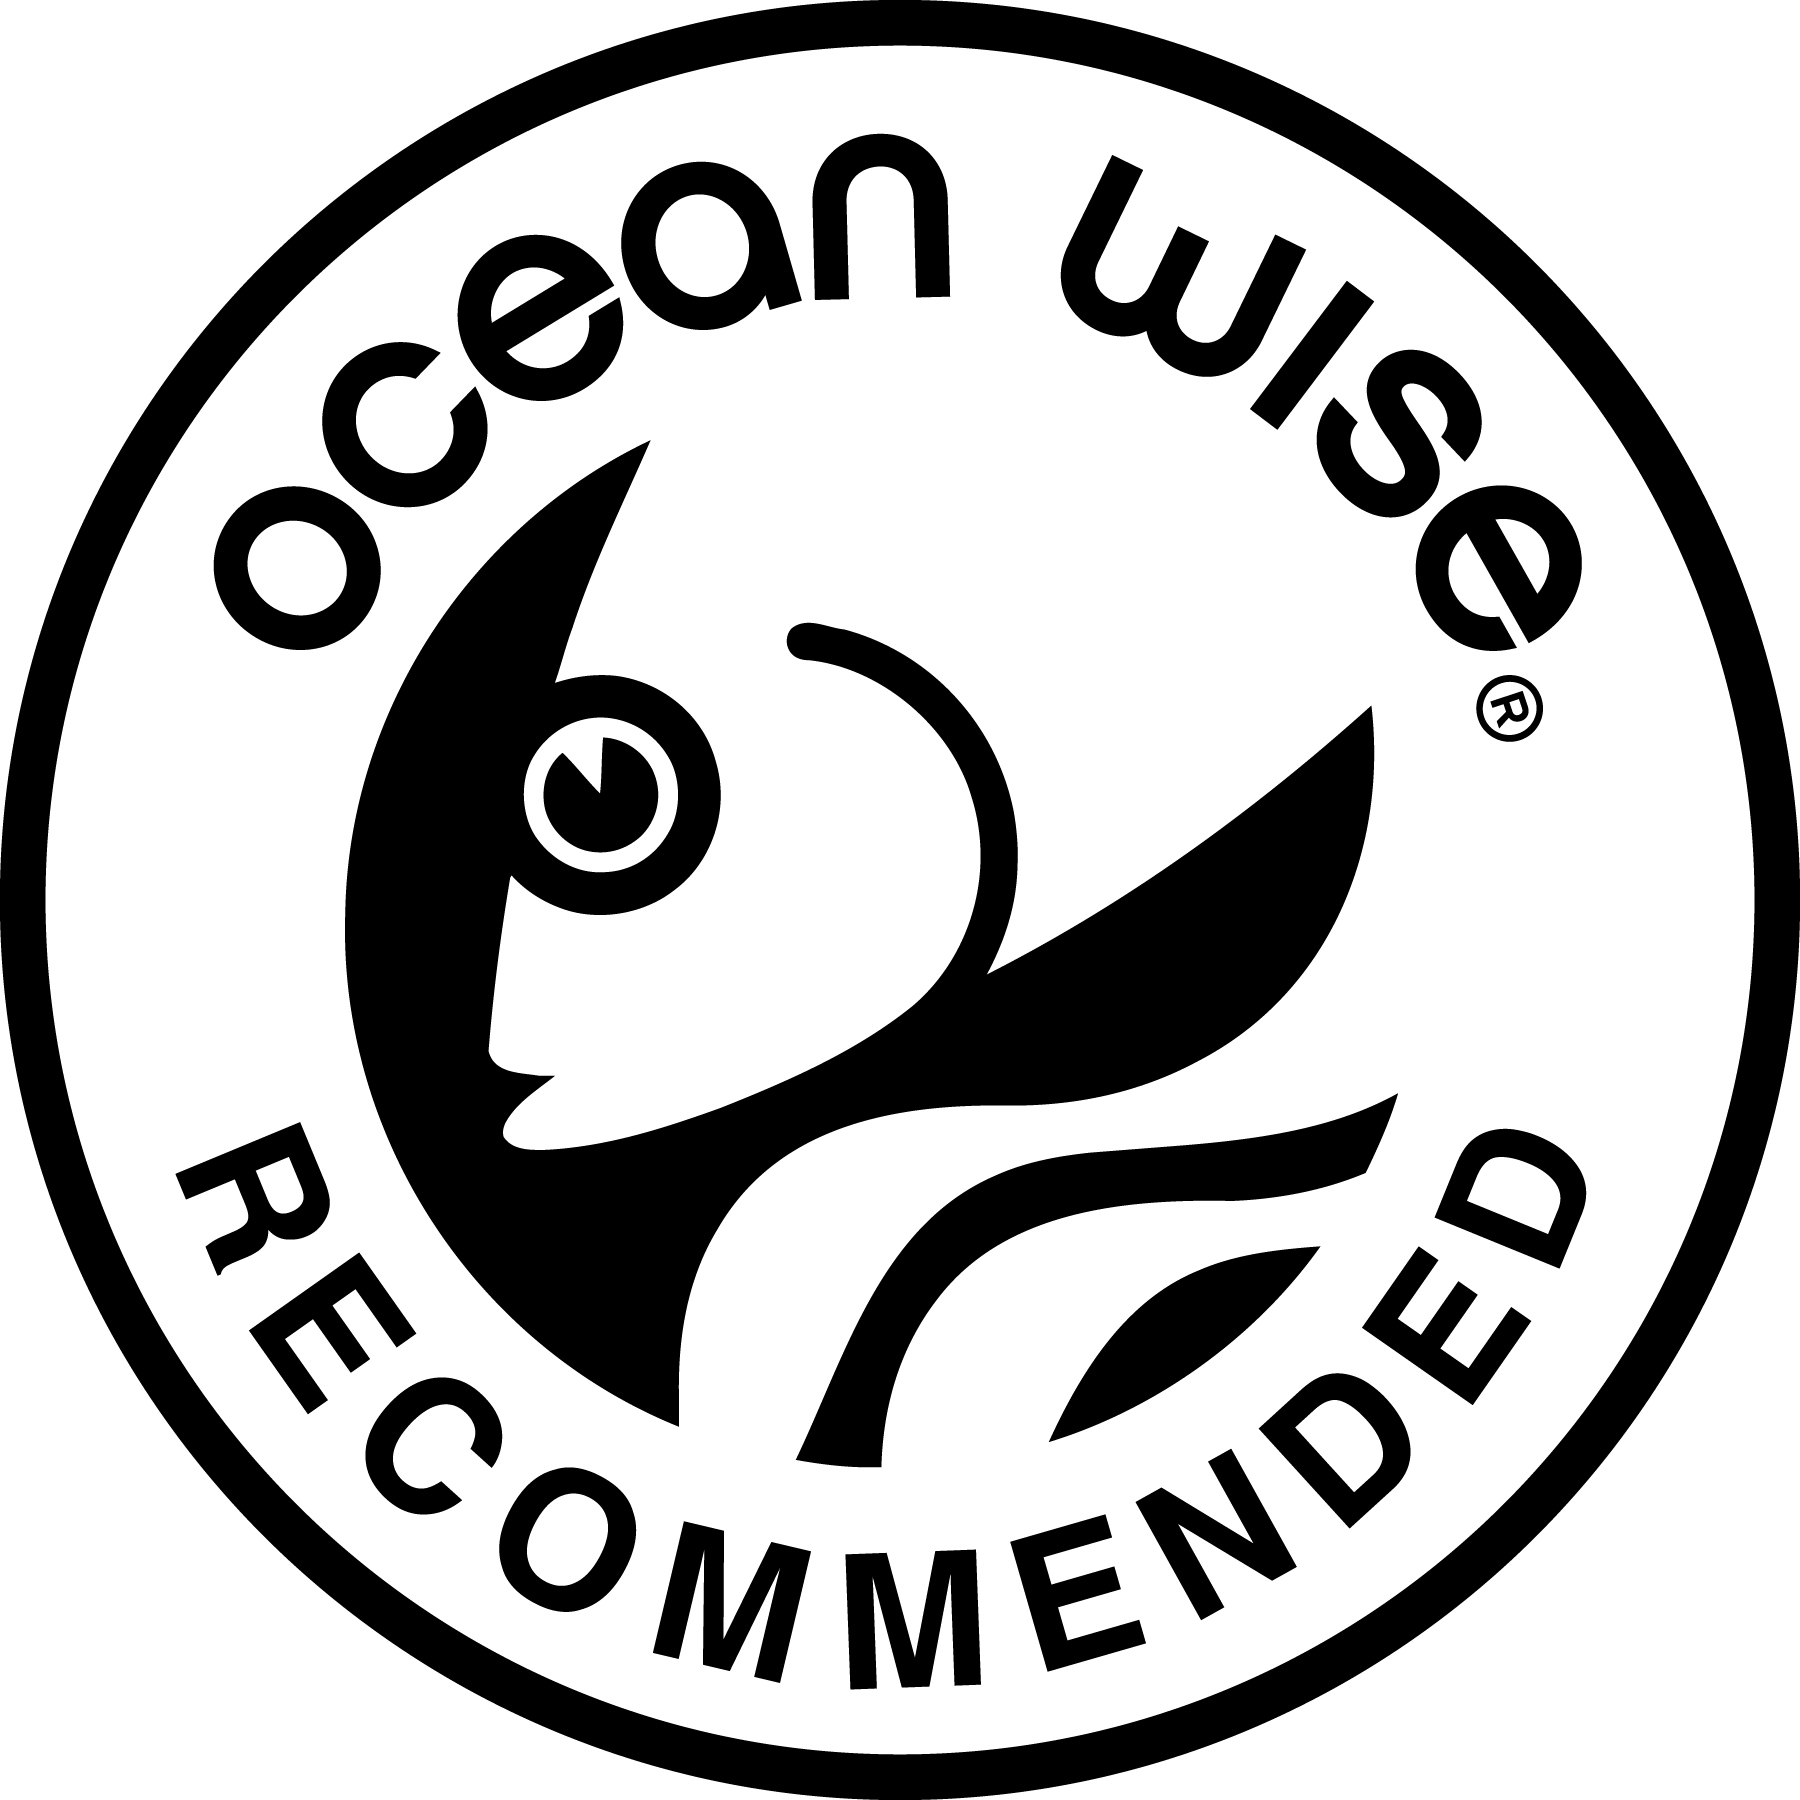 Ocean Wise recommended